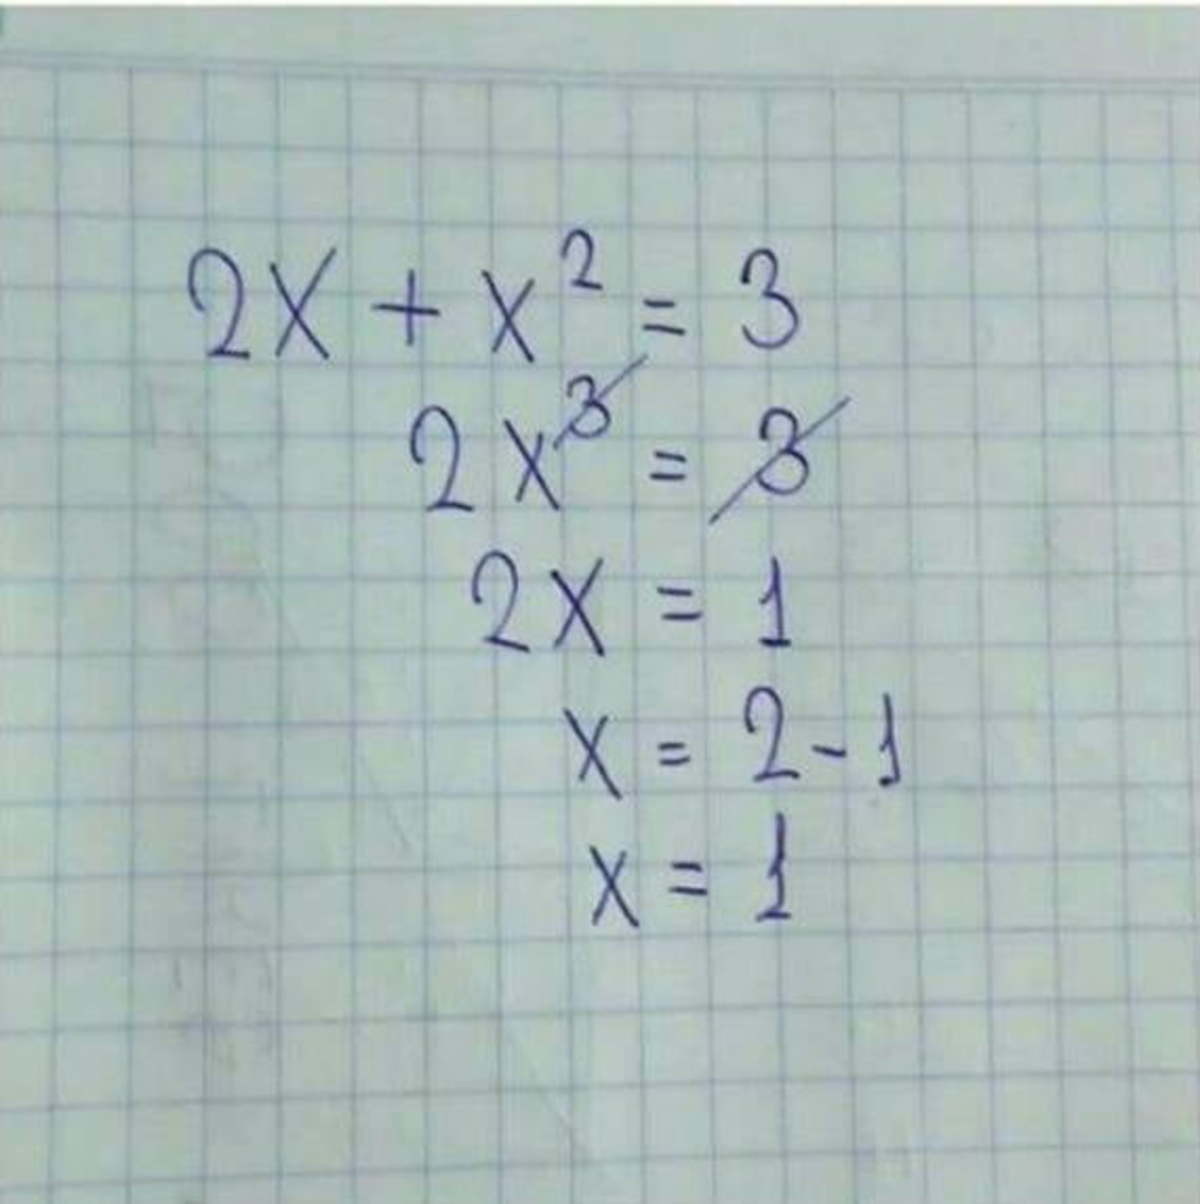 Math. .. The sad thing is the person still got one of the two correct answers, some how. 1 and or -3 are correct